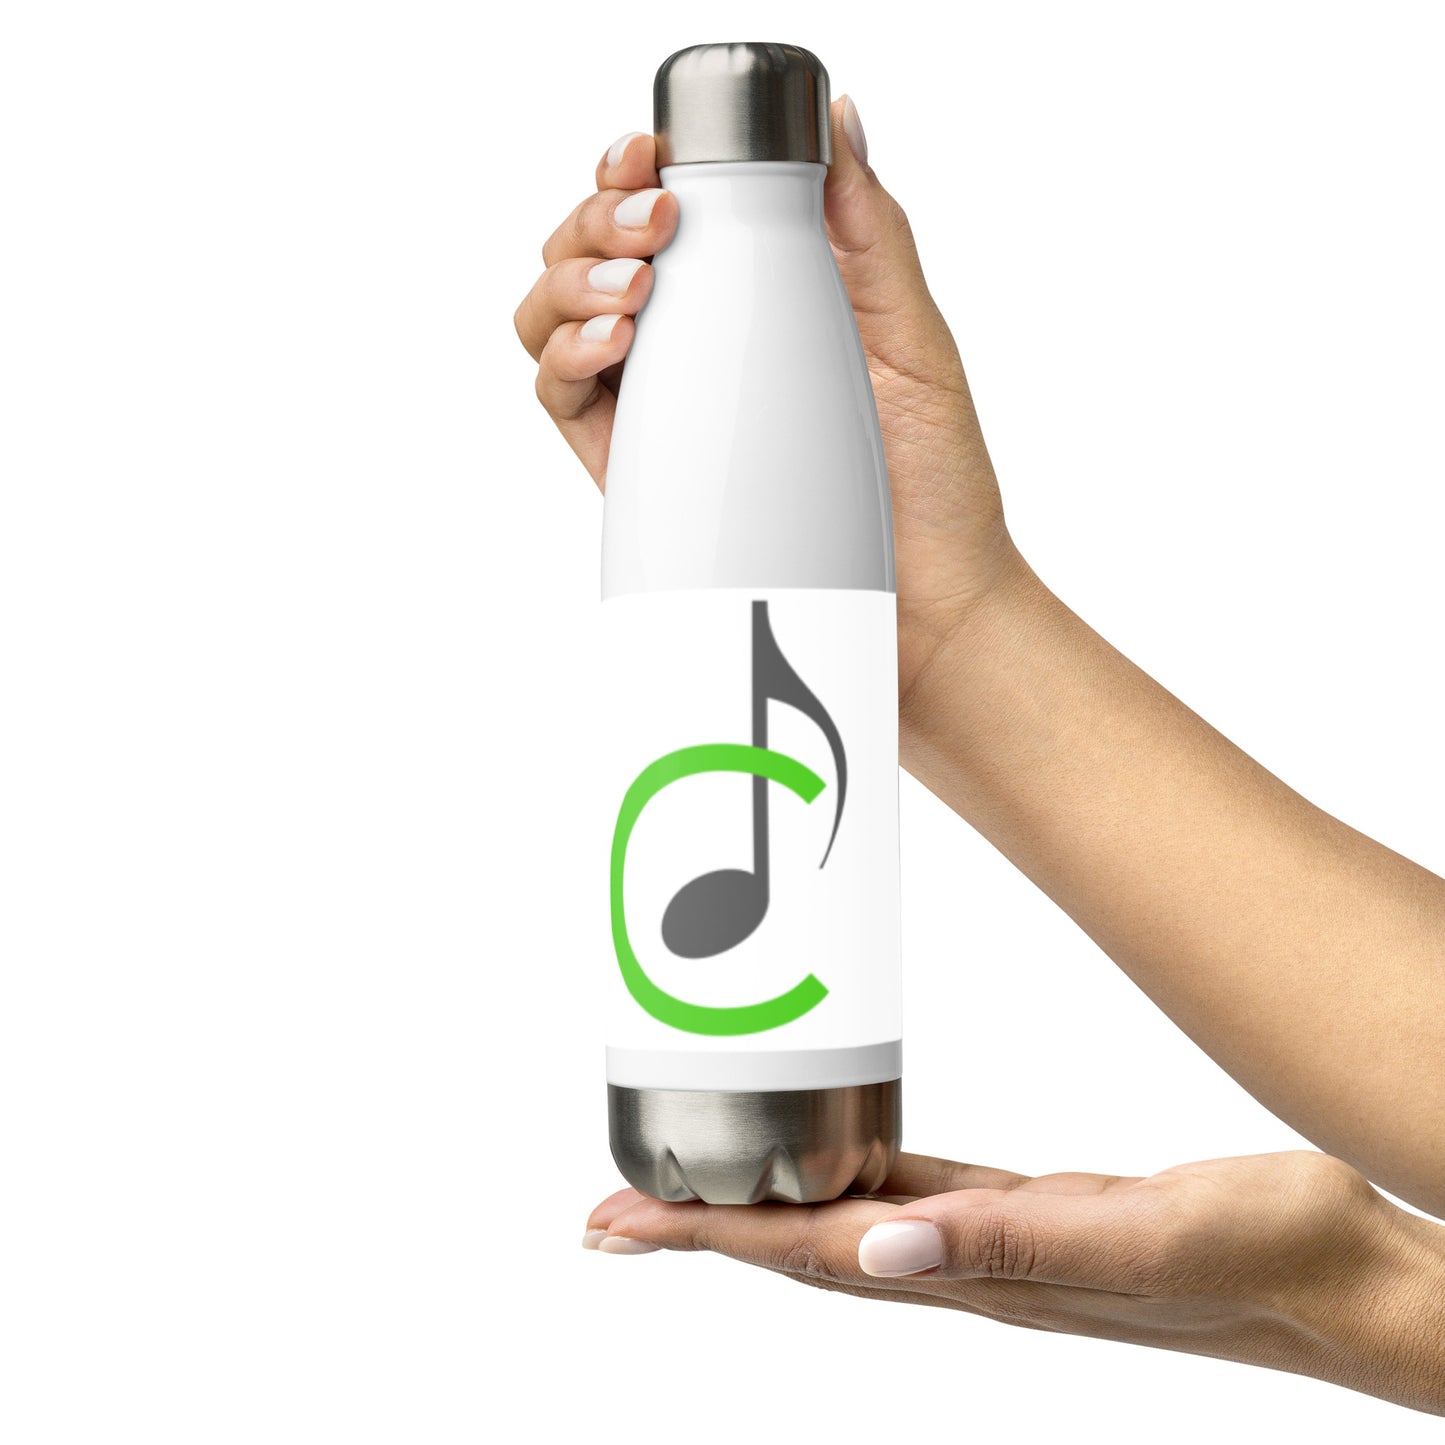 Stainless steel water bottle - Jacob Chacko